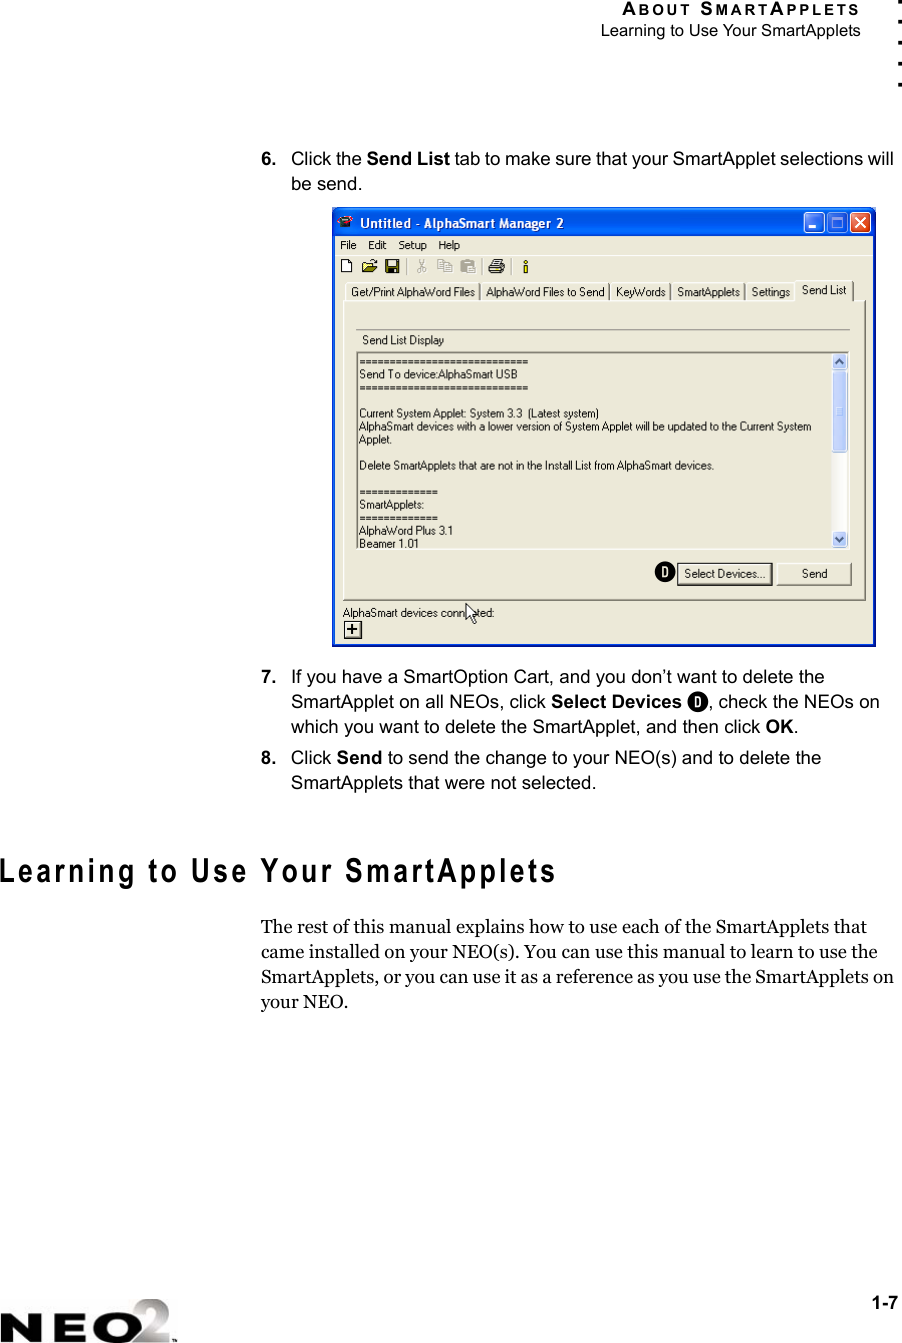 ABOUT SMARTAPPLETSLearning to Use Your SmartApplets1-7. . . . .6. Click the Send List tab to make sure that your SmartApplet selections will be send.7. If you have a SmartOption Cart, and you don’t want to delete the SmartApplet on all NEOs, click Select Devices D, check the NEOs on which you want to delete the SmartApplet, and then click OK.8. Click Send to send the change to your NEO(s) and to delete the SmartApplets that were not selected.Learning to Use Your SmartAppletsThe rest of this manual explains how to use each of the SmartApplets that came installed on your NEO(s). You can use this manual to learn to use the SmartApplets, or you can use it as a reference as you use the SmartApplets on your NEO.D